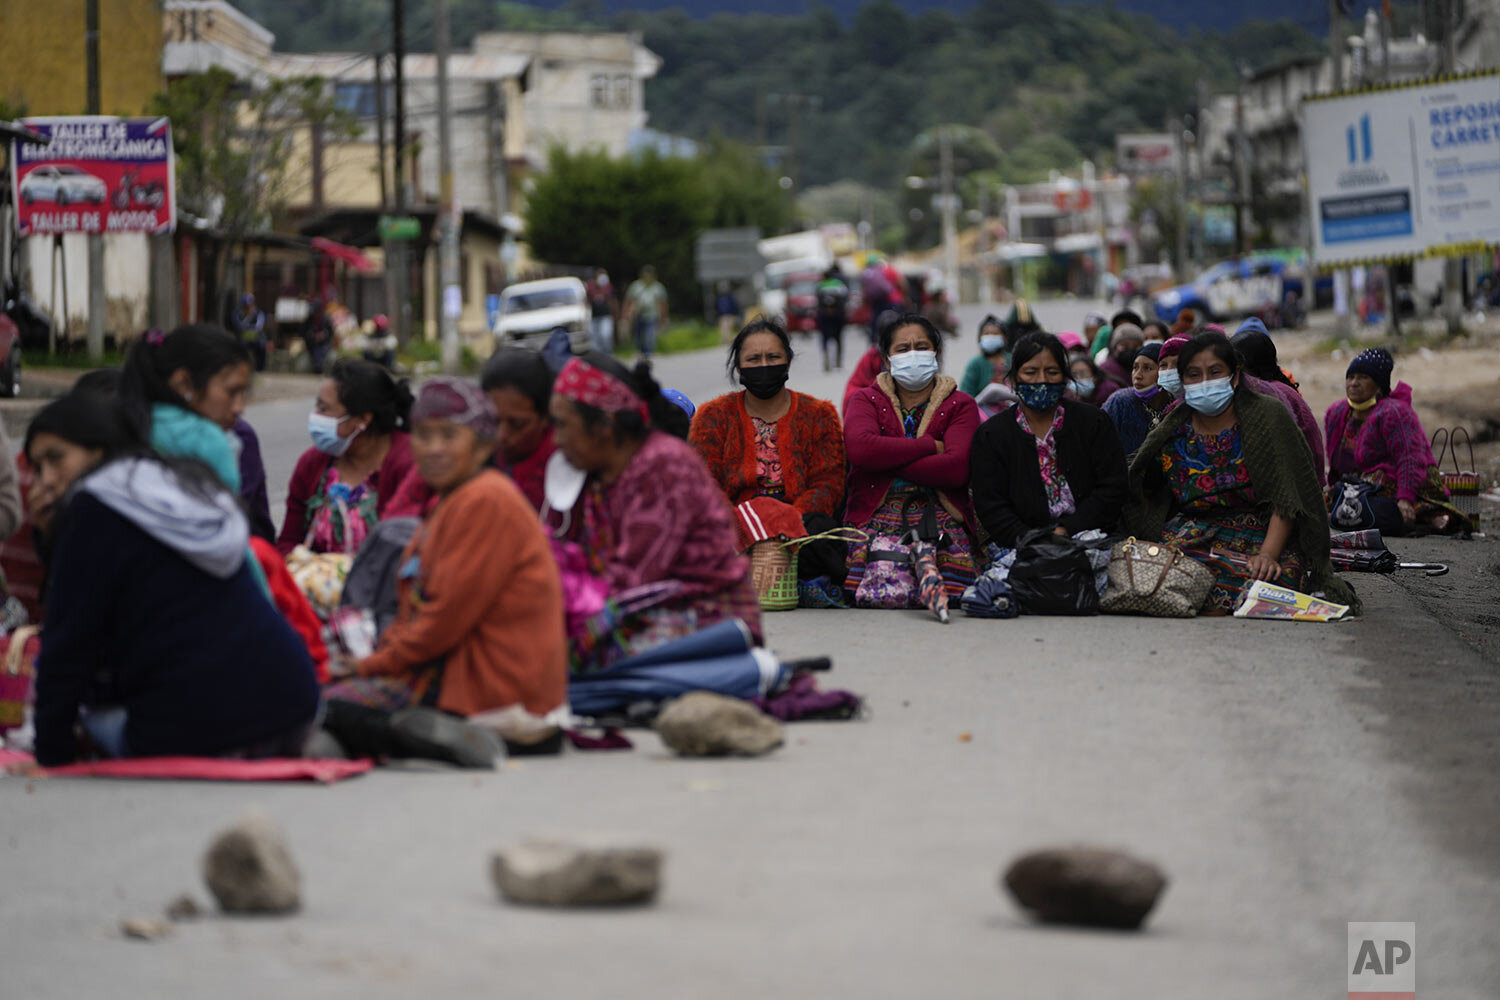  Women block the Inter American Highway in Totonicapan, Guatemala, after Indigenous leaders called for a nationwide strike to pressure Guatemalan President Alejandro Giammattei to resign, Thursday, July 29, 2021. The protest comes in response to the 